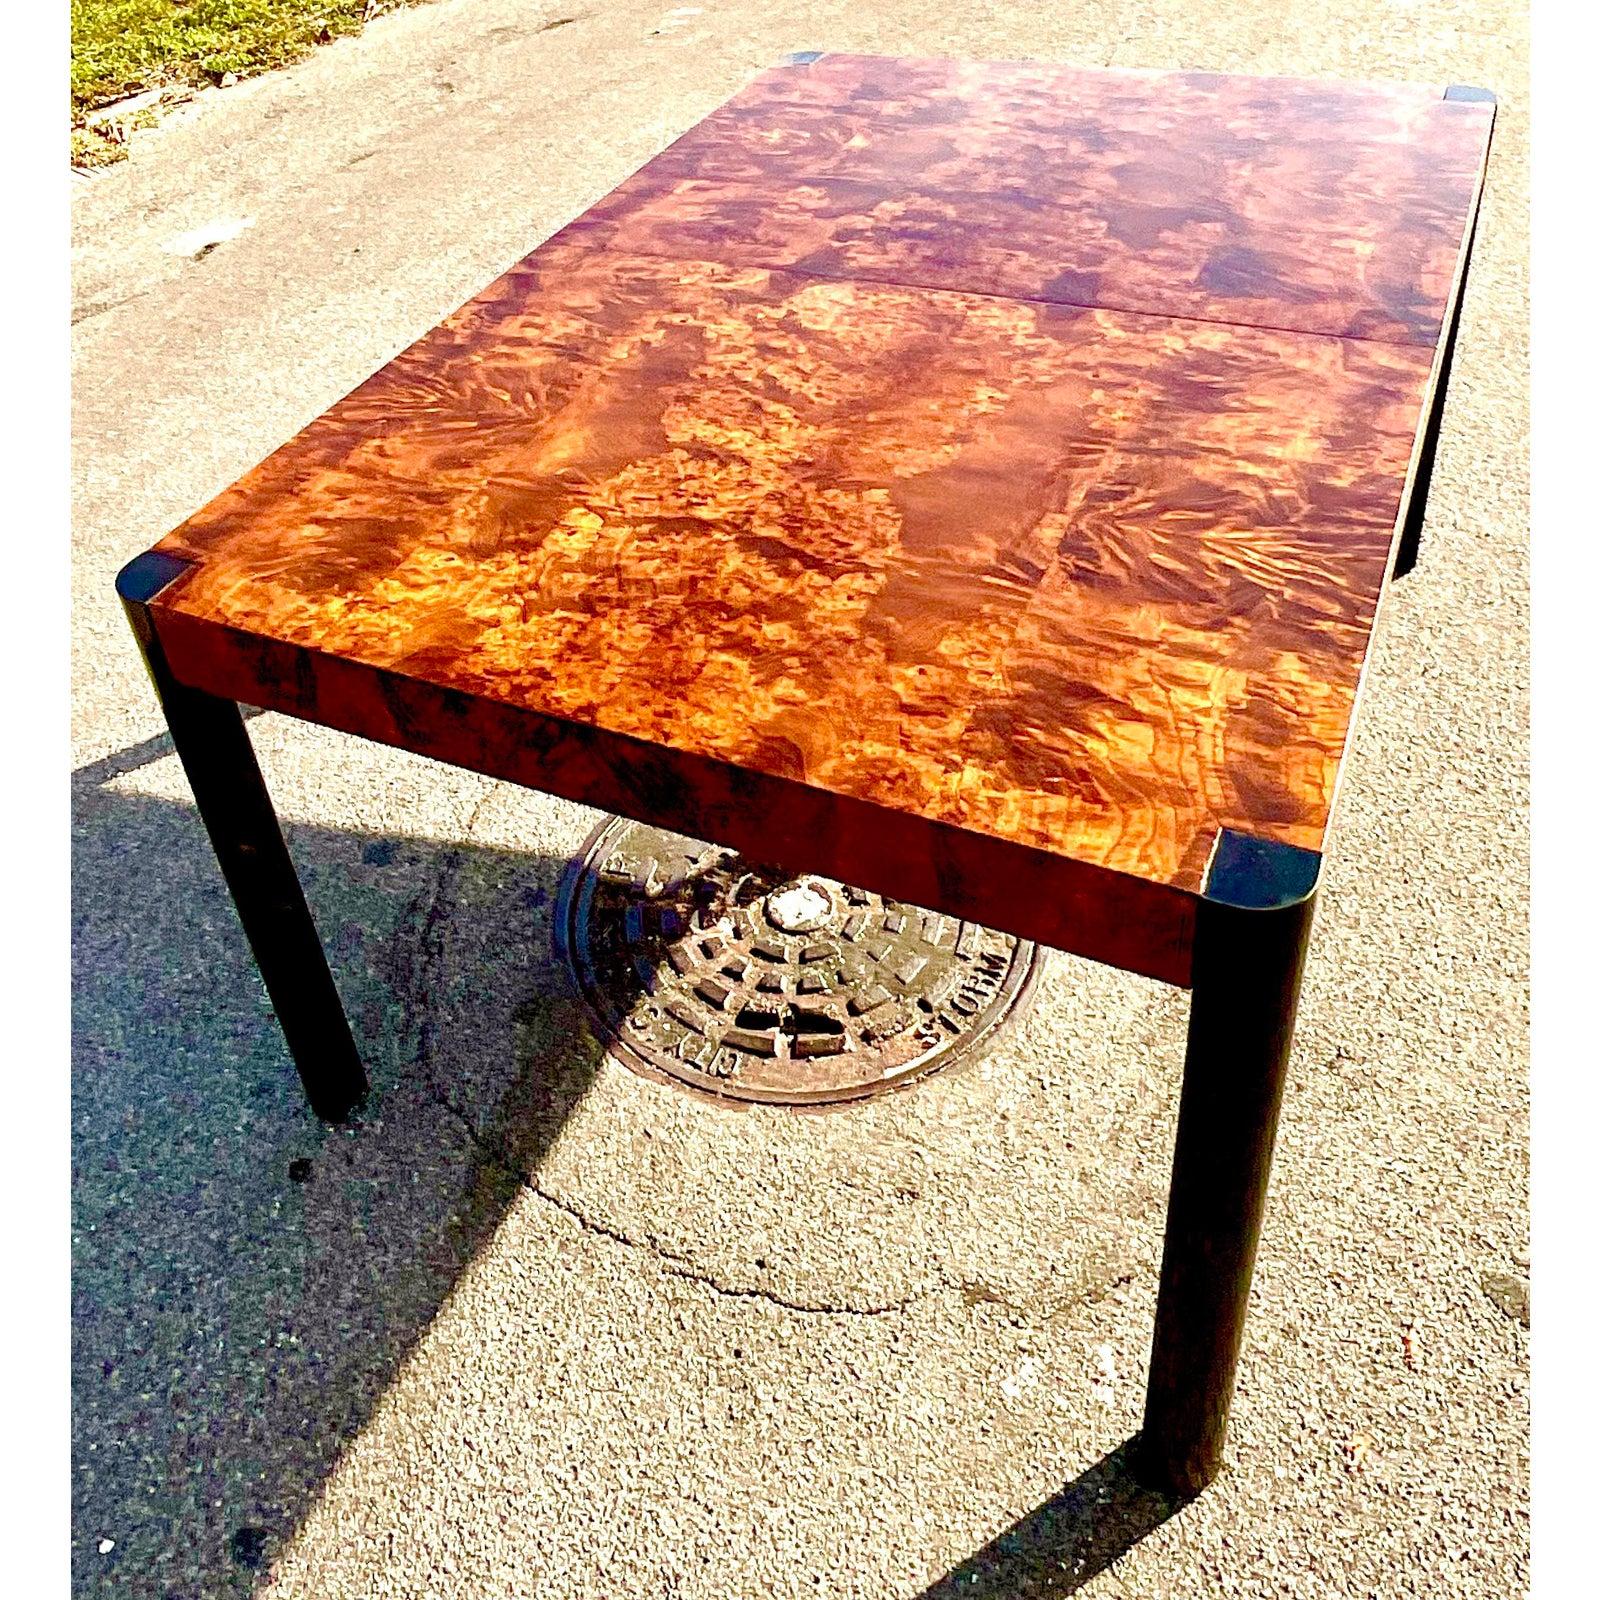 Fantastic midcentury burl wood dining table. Made by the iconic Century Furniture incredible wood grain detail. Two leaves makes it perfect for extra large groups. Acquired from a Palm Beach estate.